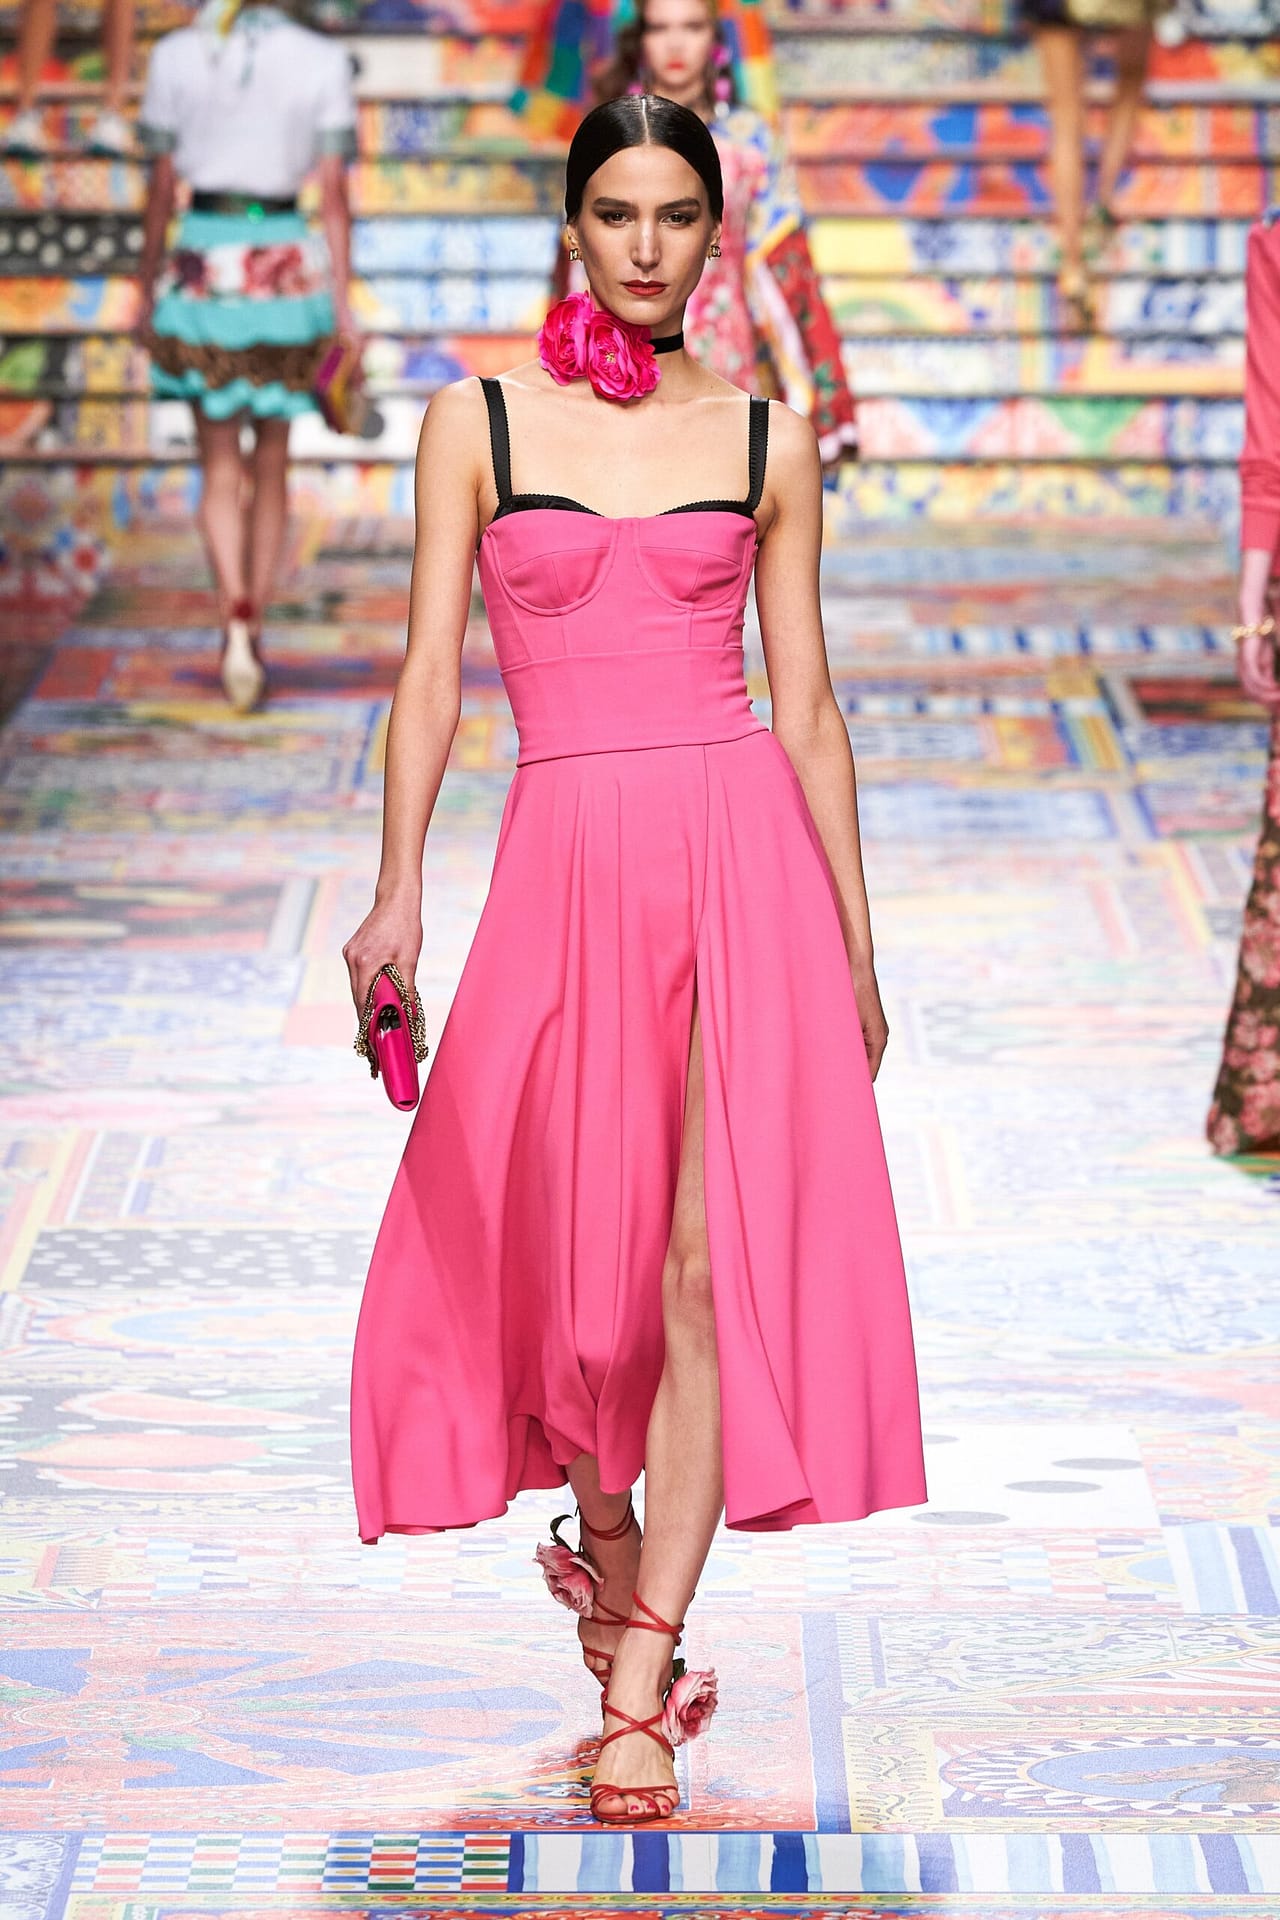 Rosa lampone - Dolce & Gabbana Ready-to-Wear Spring 2021